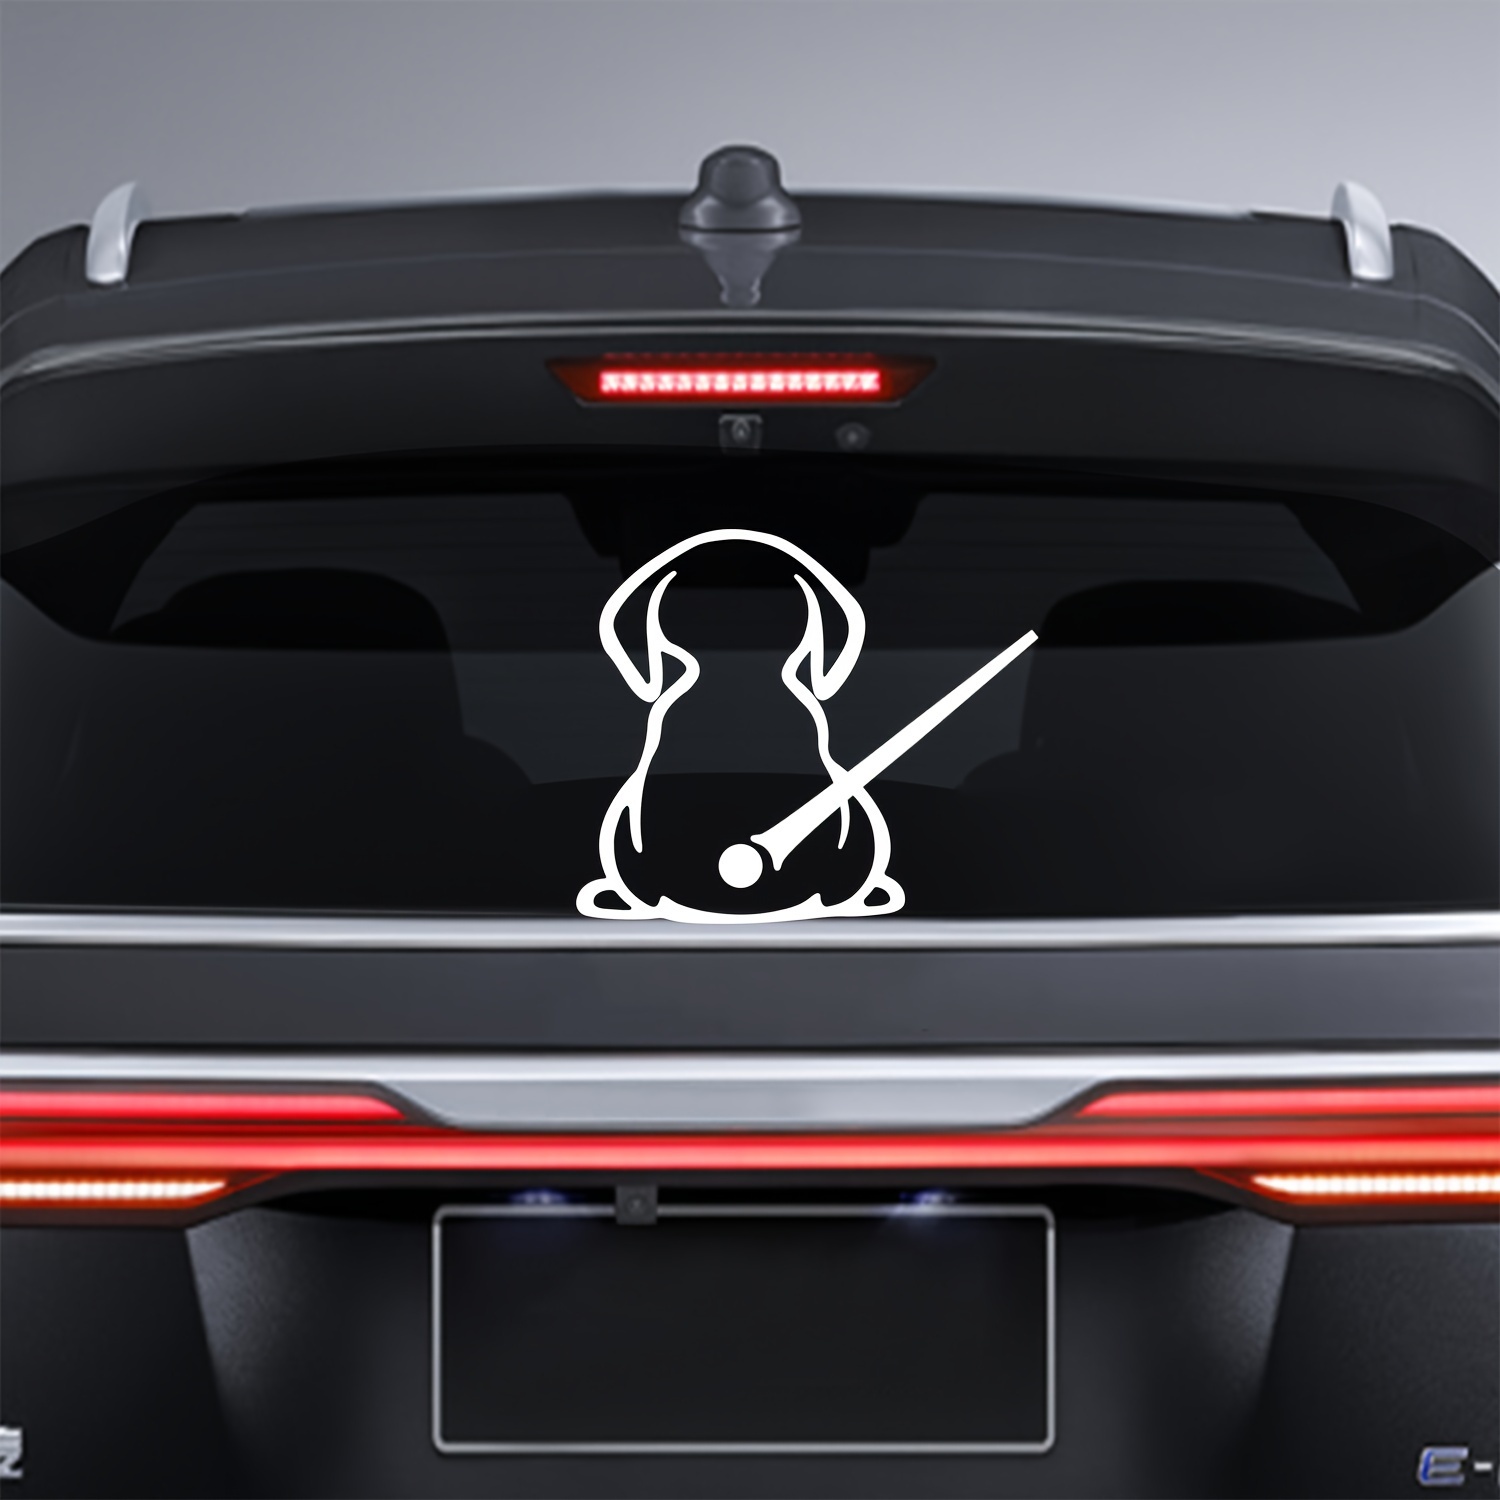 

Adorable Dog Back Car Vinyl Wiper Sticker For Car Truck Rear Window Windshield Funny Wagging Animal Tail Decal Universal Motorcycle Laptop Decoration